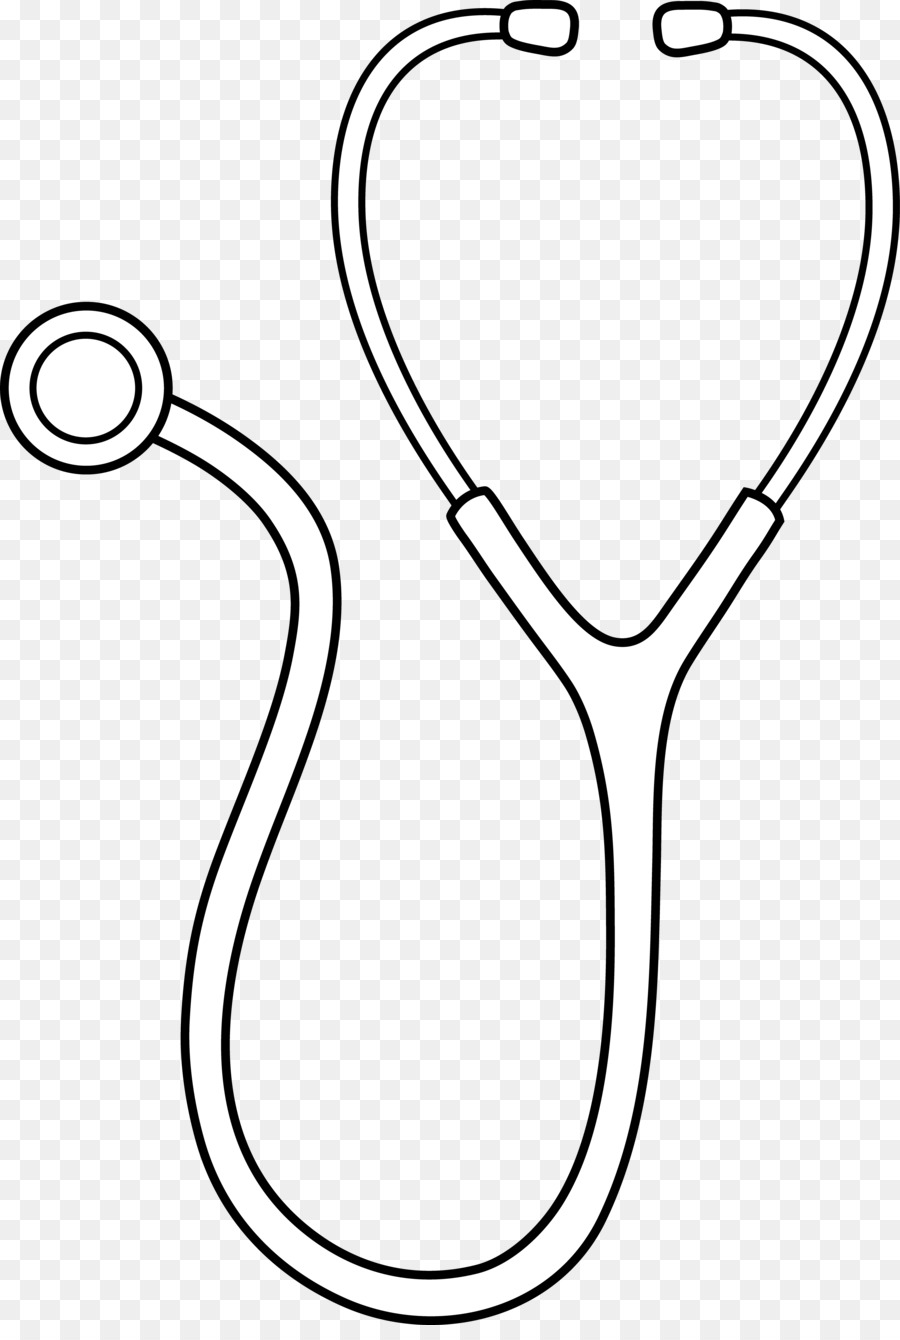 Stethoscope Physician Medicine Clip art - Doctor Instruments Cliparts png download - 4289*6313 - Free Transparent Stethoscope png Download.